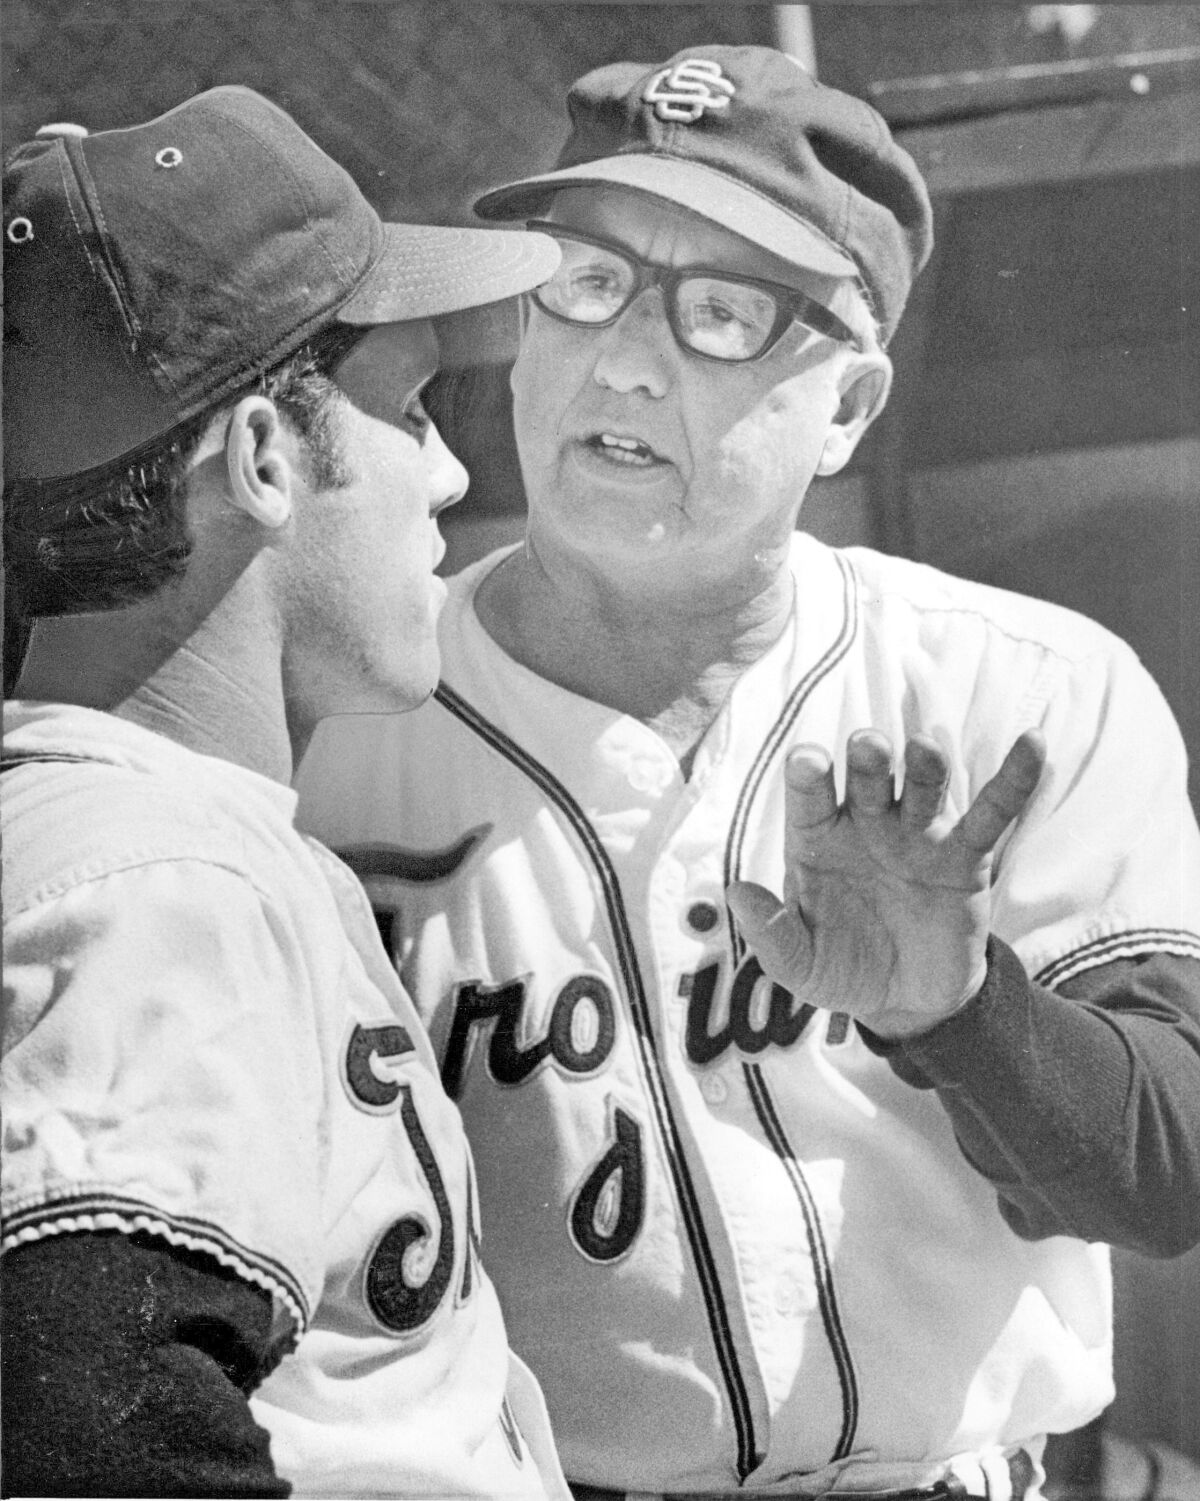 USC baseball coach Rod Dedeaux talks with one of his players during a game in 1970.